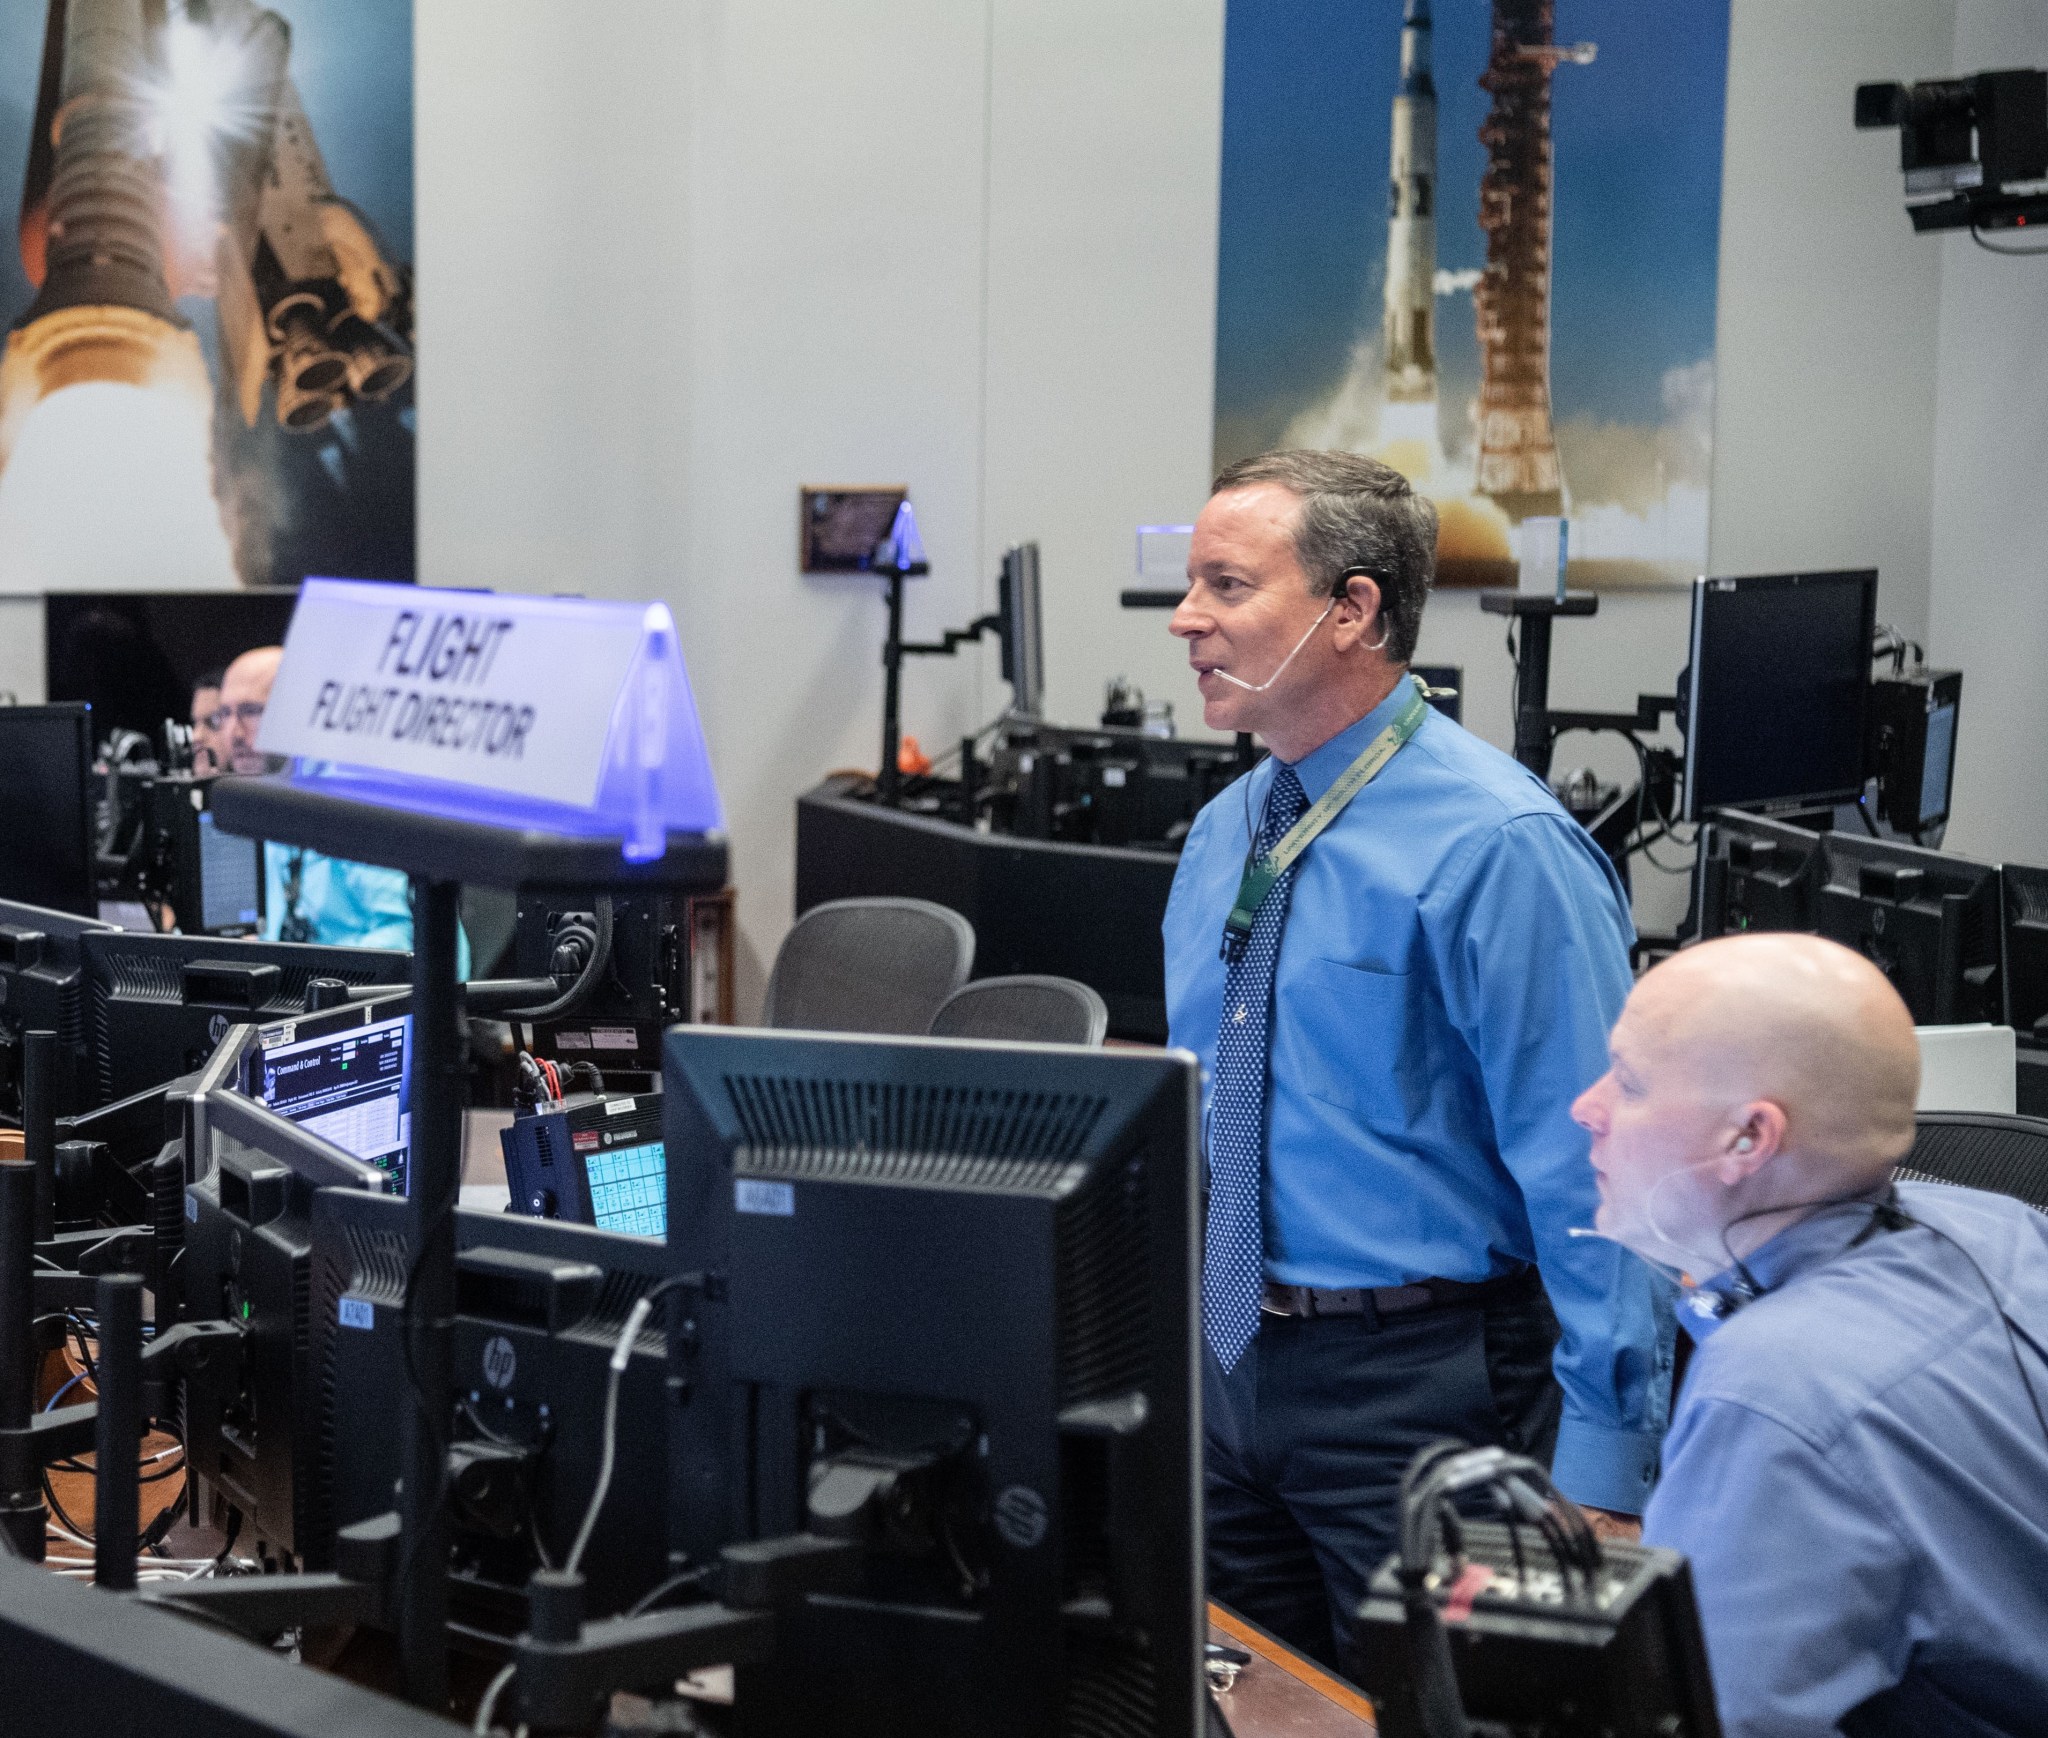 Artemis I flight directors Rick LaBrode (left) and Judd Frieling (right) inside the White Flight Control Room at the Johnson Space Center in Houston during a simulation.